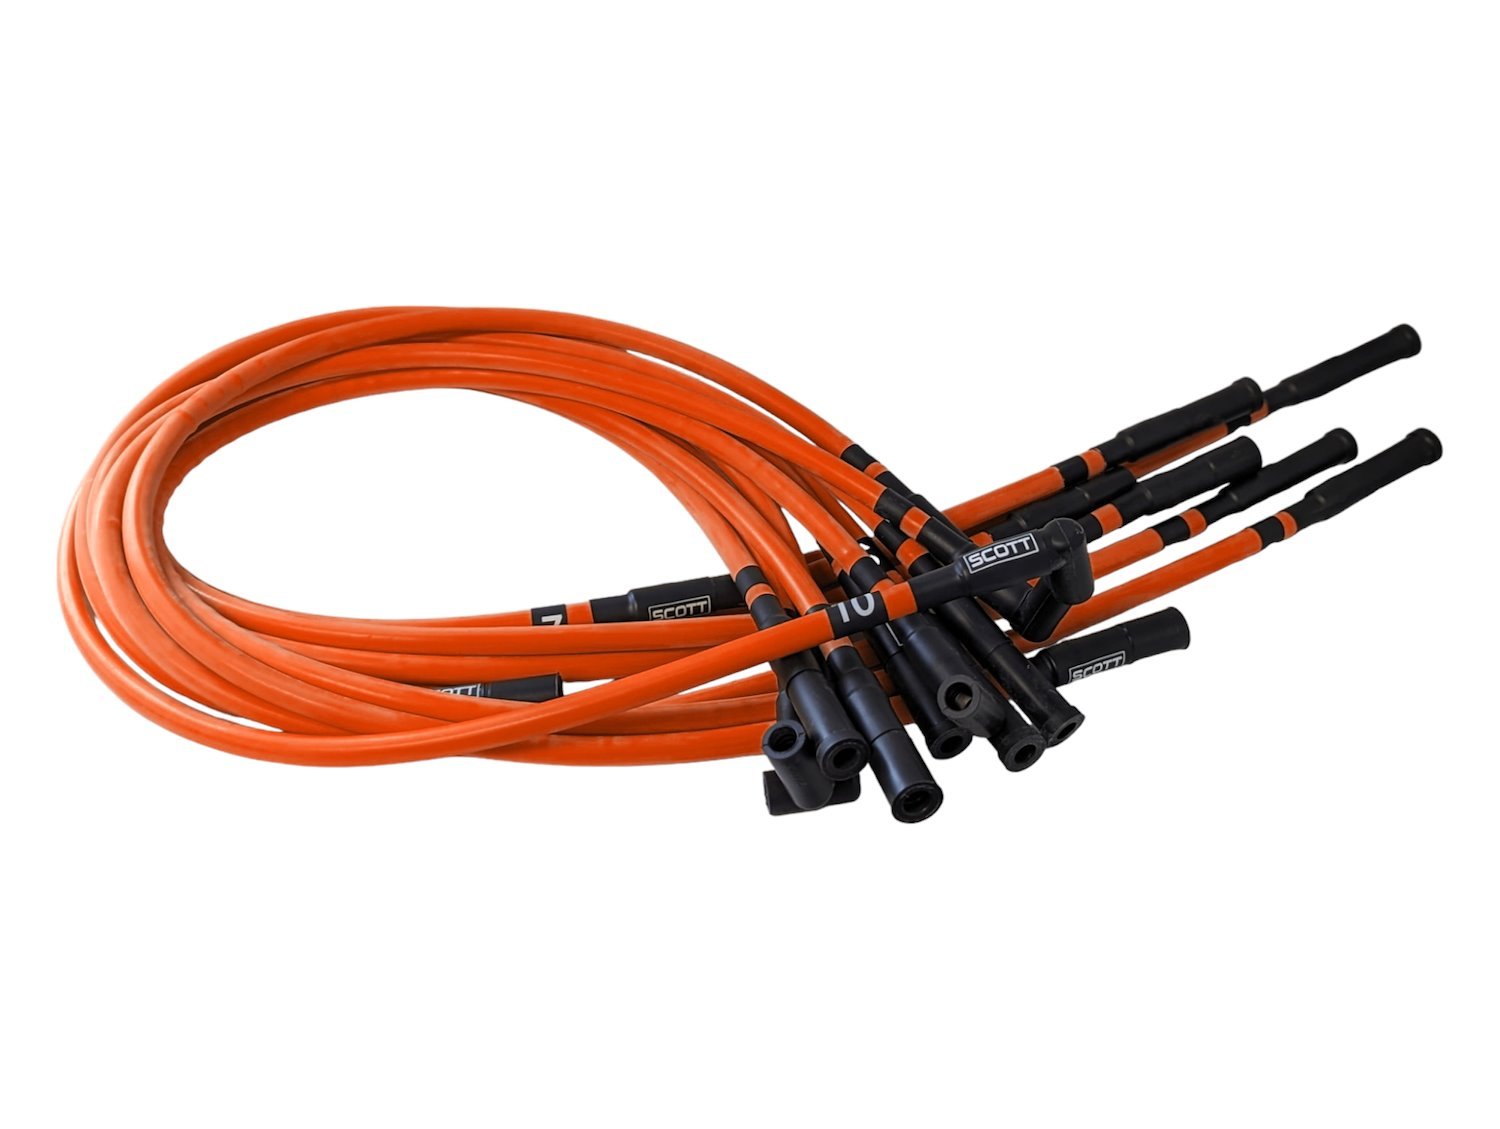 SPW-CH-690-III-9 High-Performance Silicone-Sleeved Spark Plug Wire Set for Dodge Viper (Gen-3) [Fluorescent Orange]